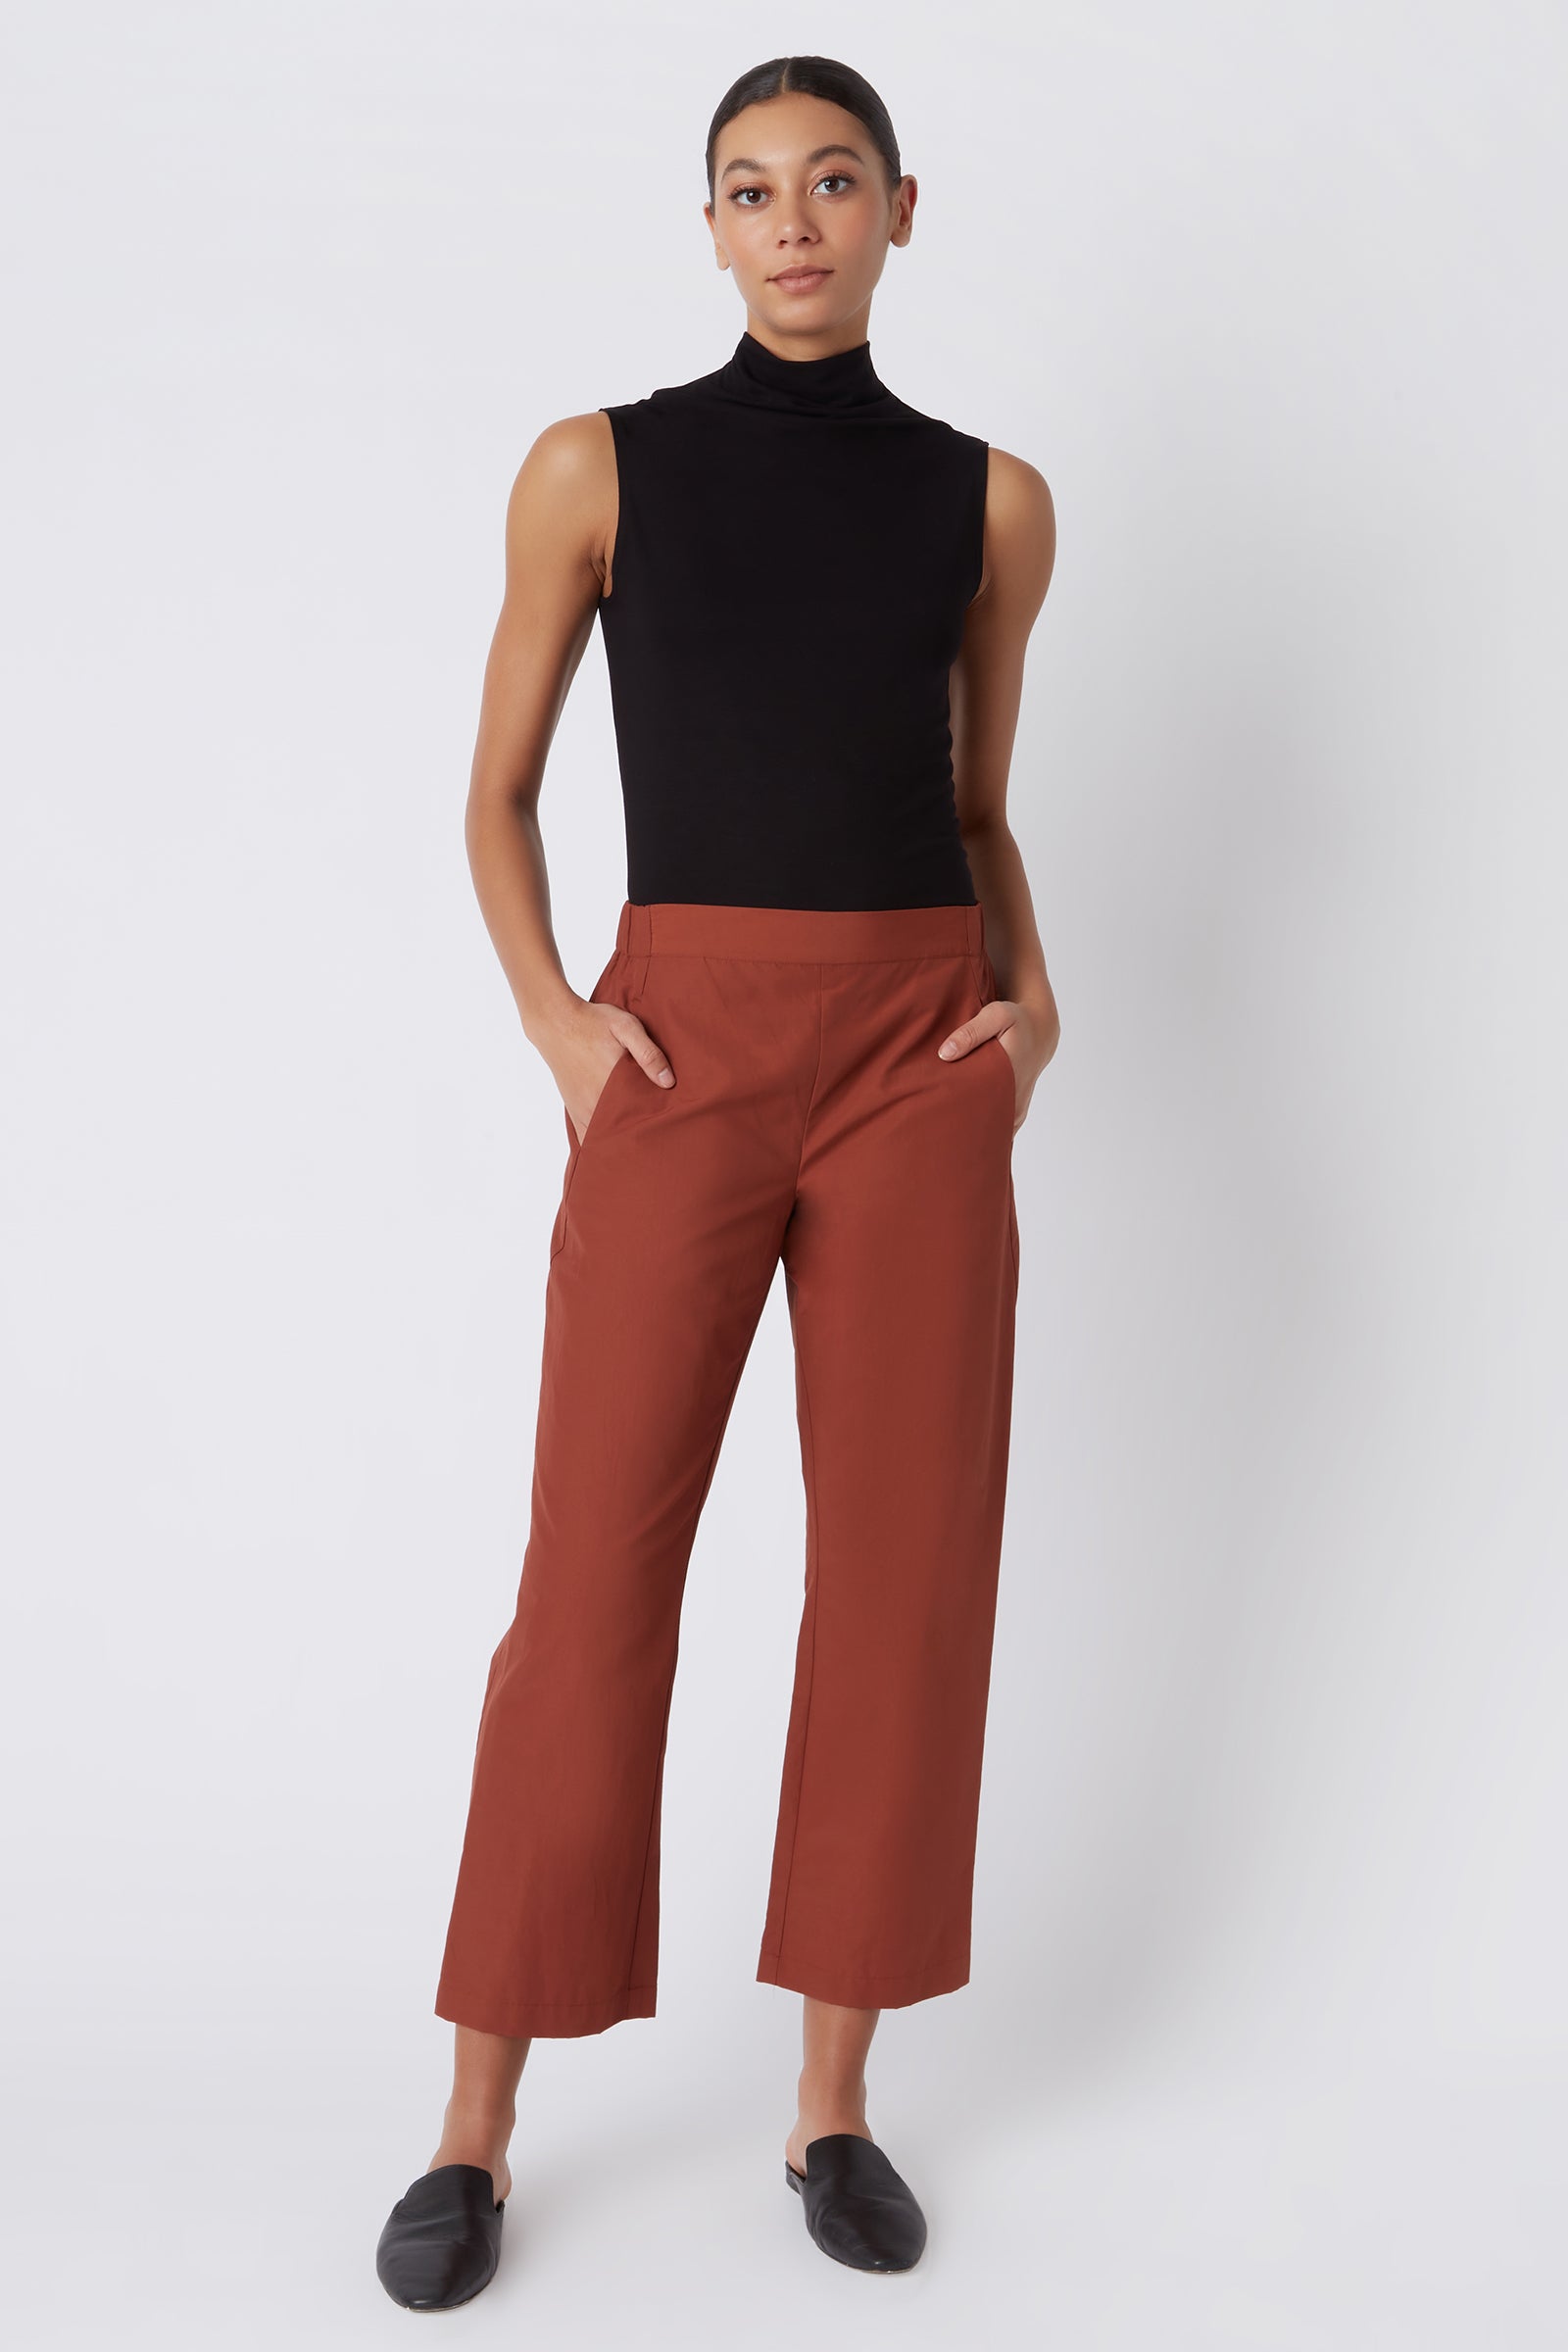 Kal Rieman Brit Crop Pant in Rust Italian Broadcloth on Model with Hands in Pocket Full Front View